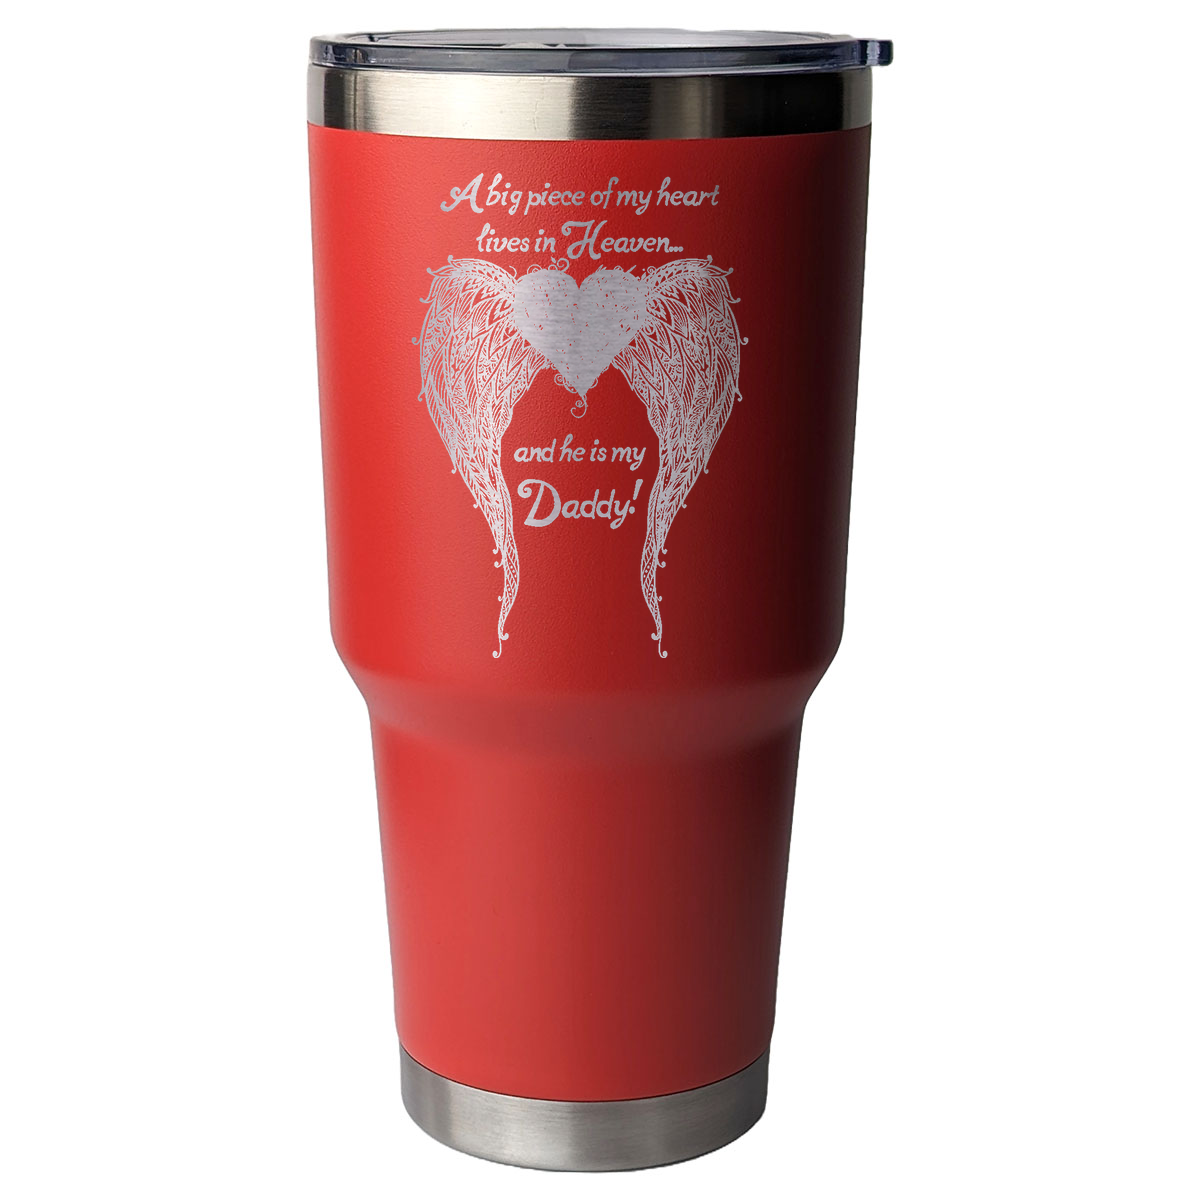 Daddy - A Big Piece of my Heart 30 Ounce Laser Etched Tumbler Red